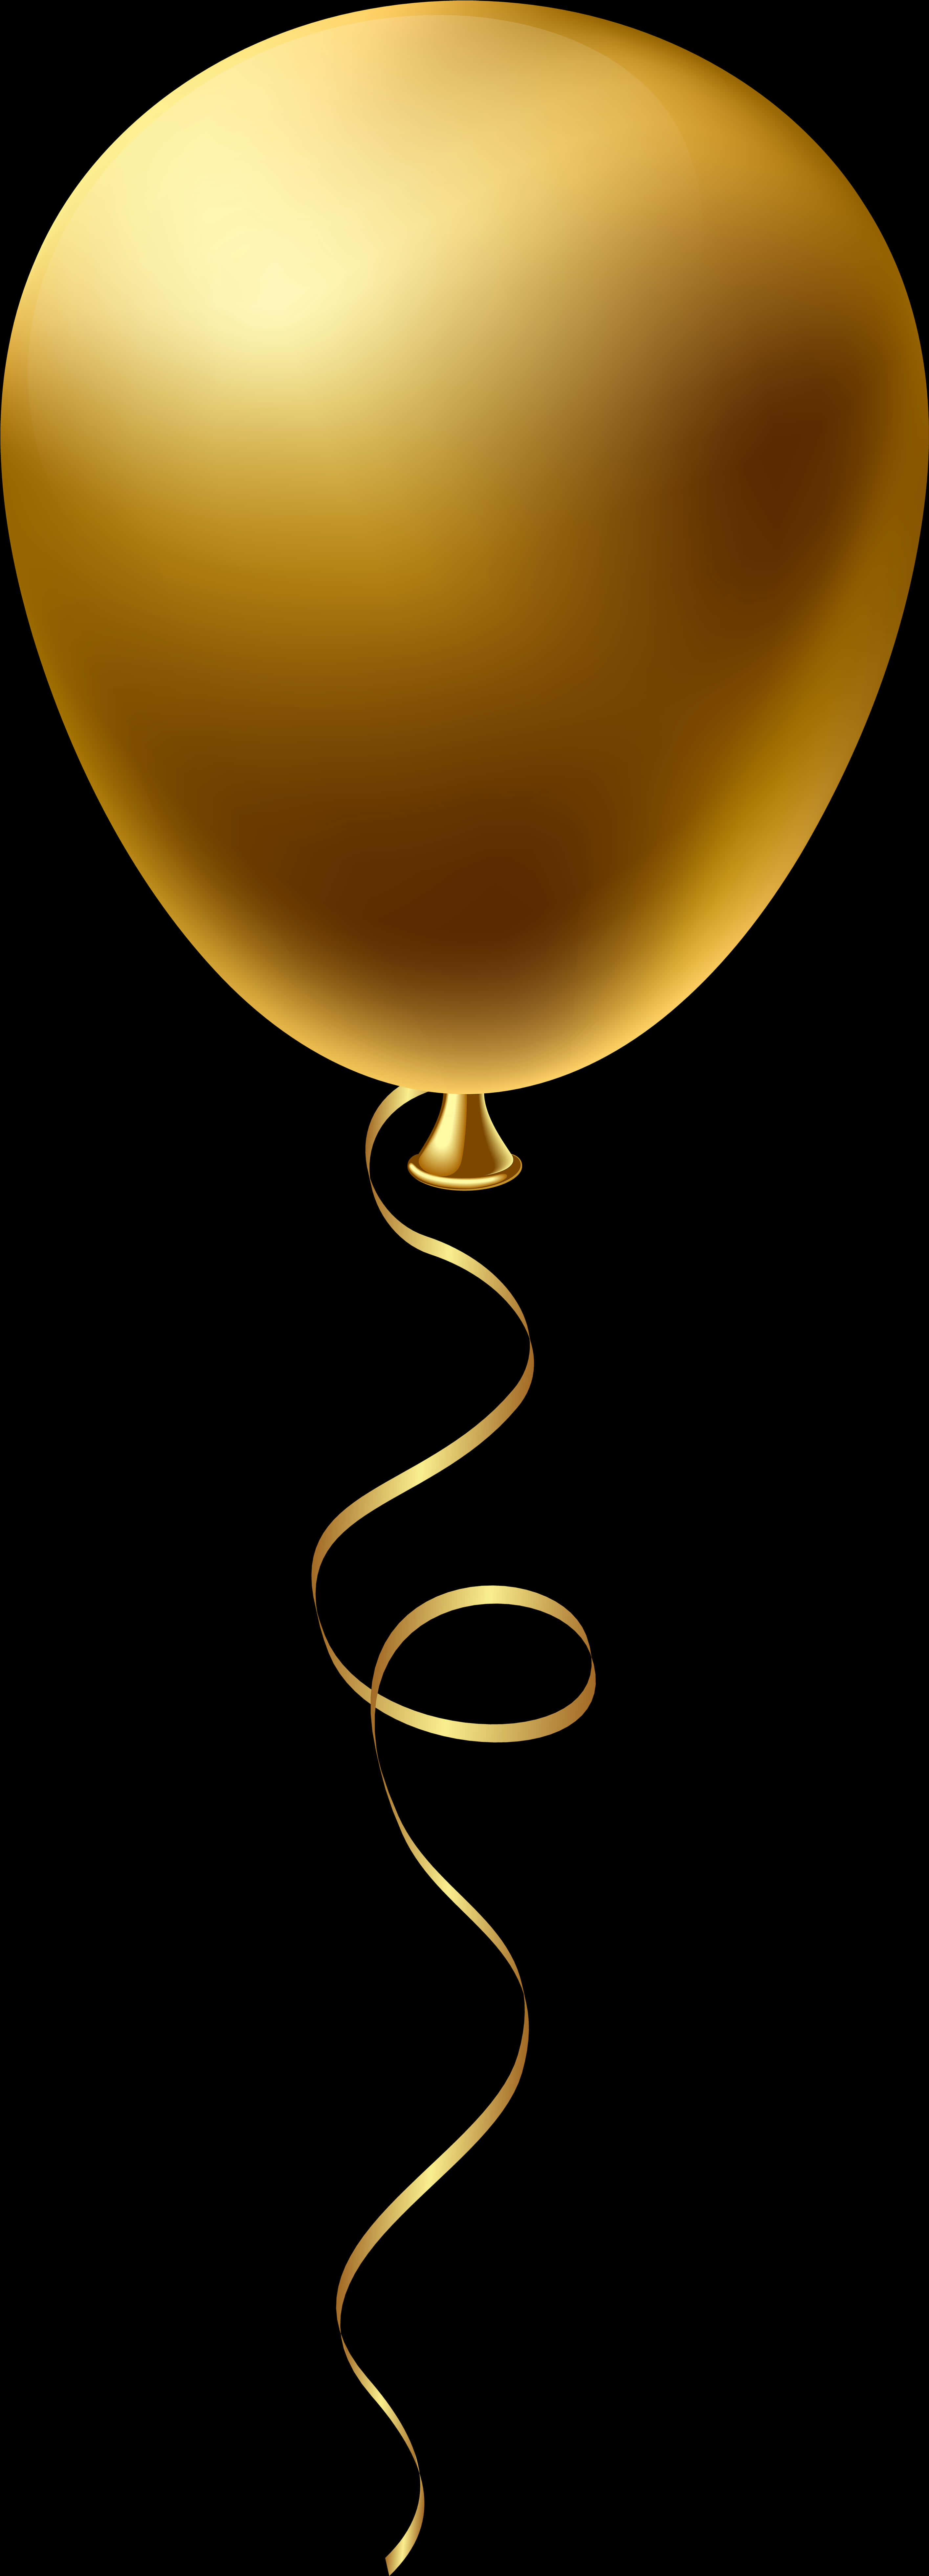 A Gold Balloon With A Ribbon